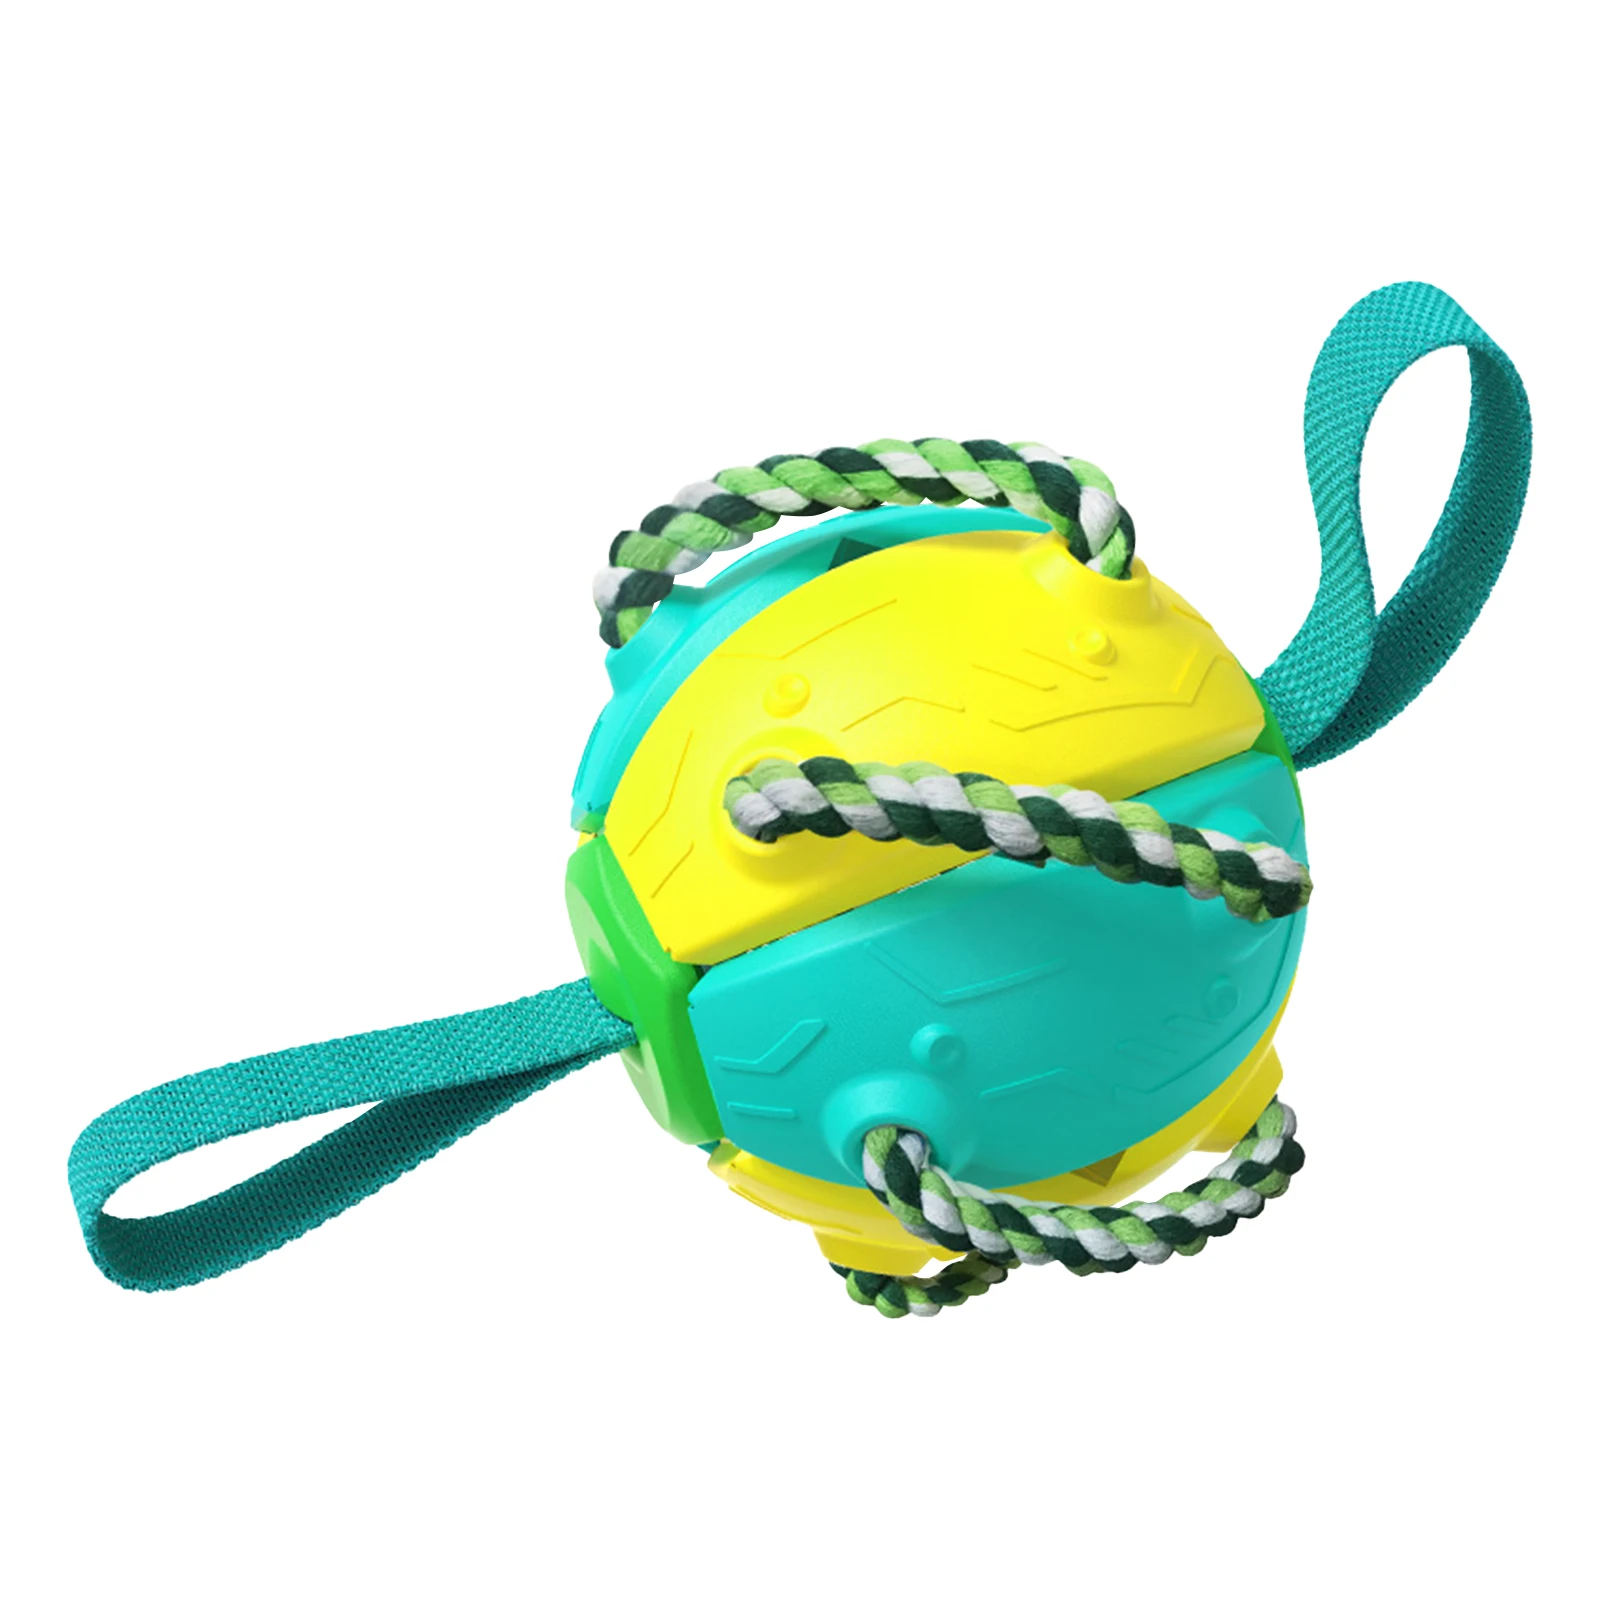 

Pet Training Gifts Tug Of War Outdoor Wear Resistant Multifunctional With Straps Flying Disk Interactive Ball Dog Toys Safe